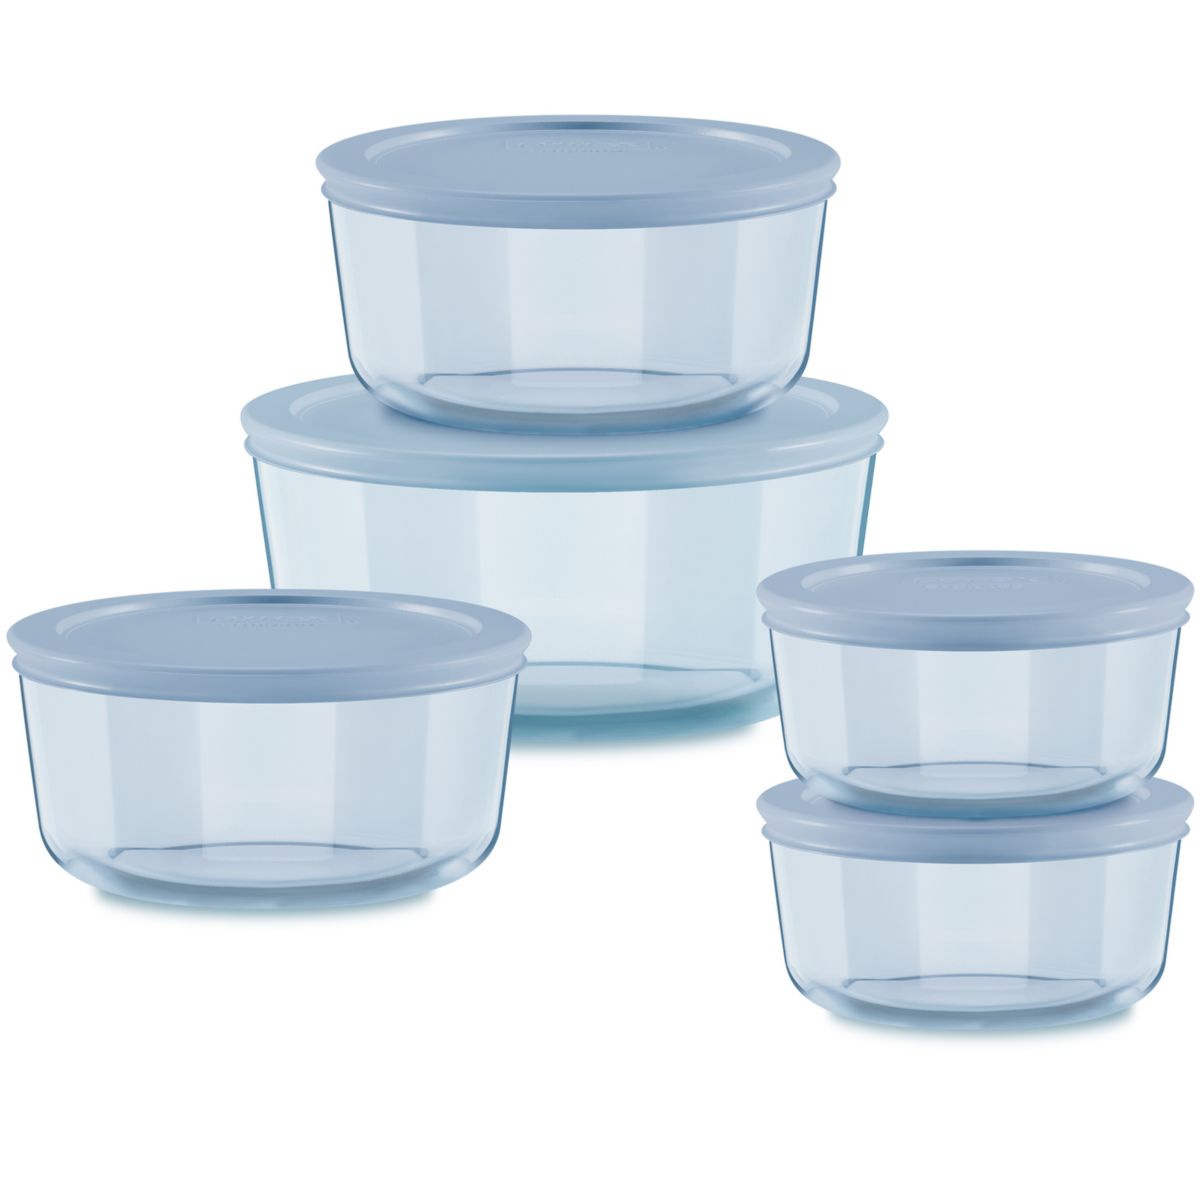 Pyrex Simply Store Tinted 10-piece Round Food Storage Container Set with Plastic Lids, Blue Pyrex